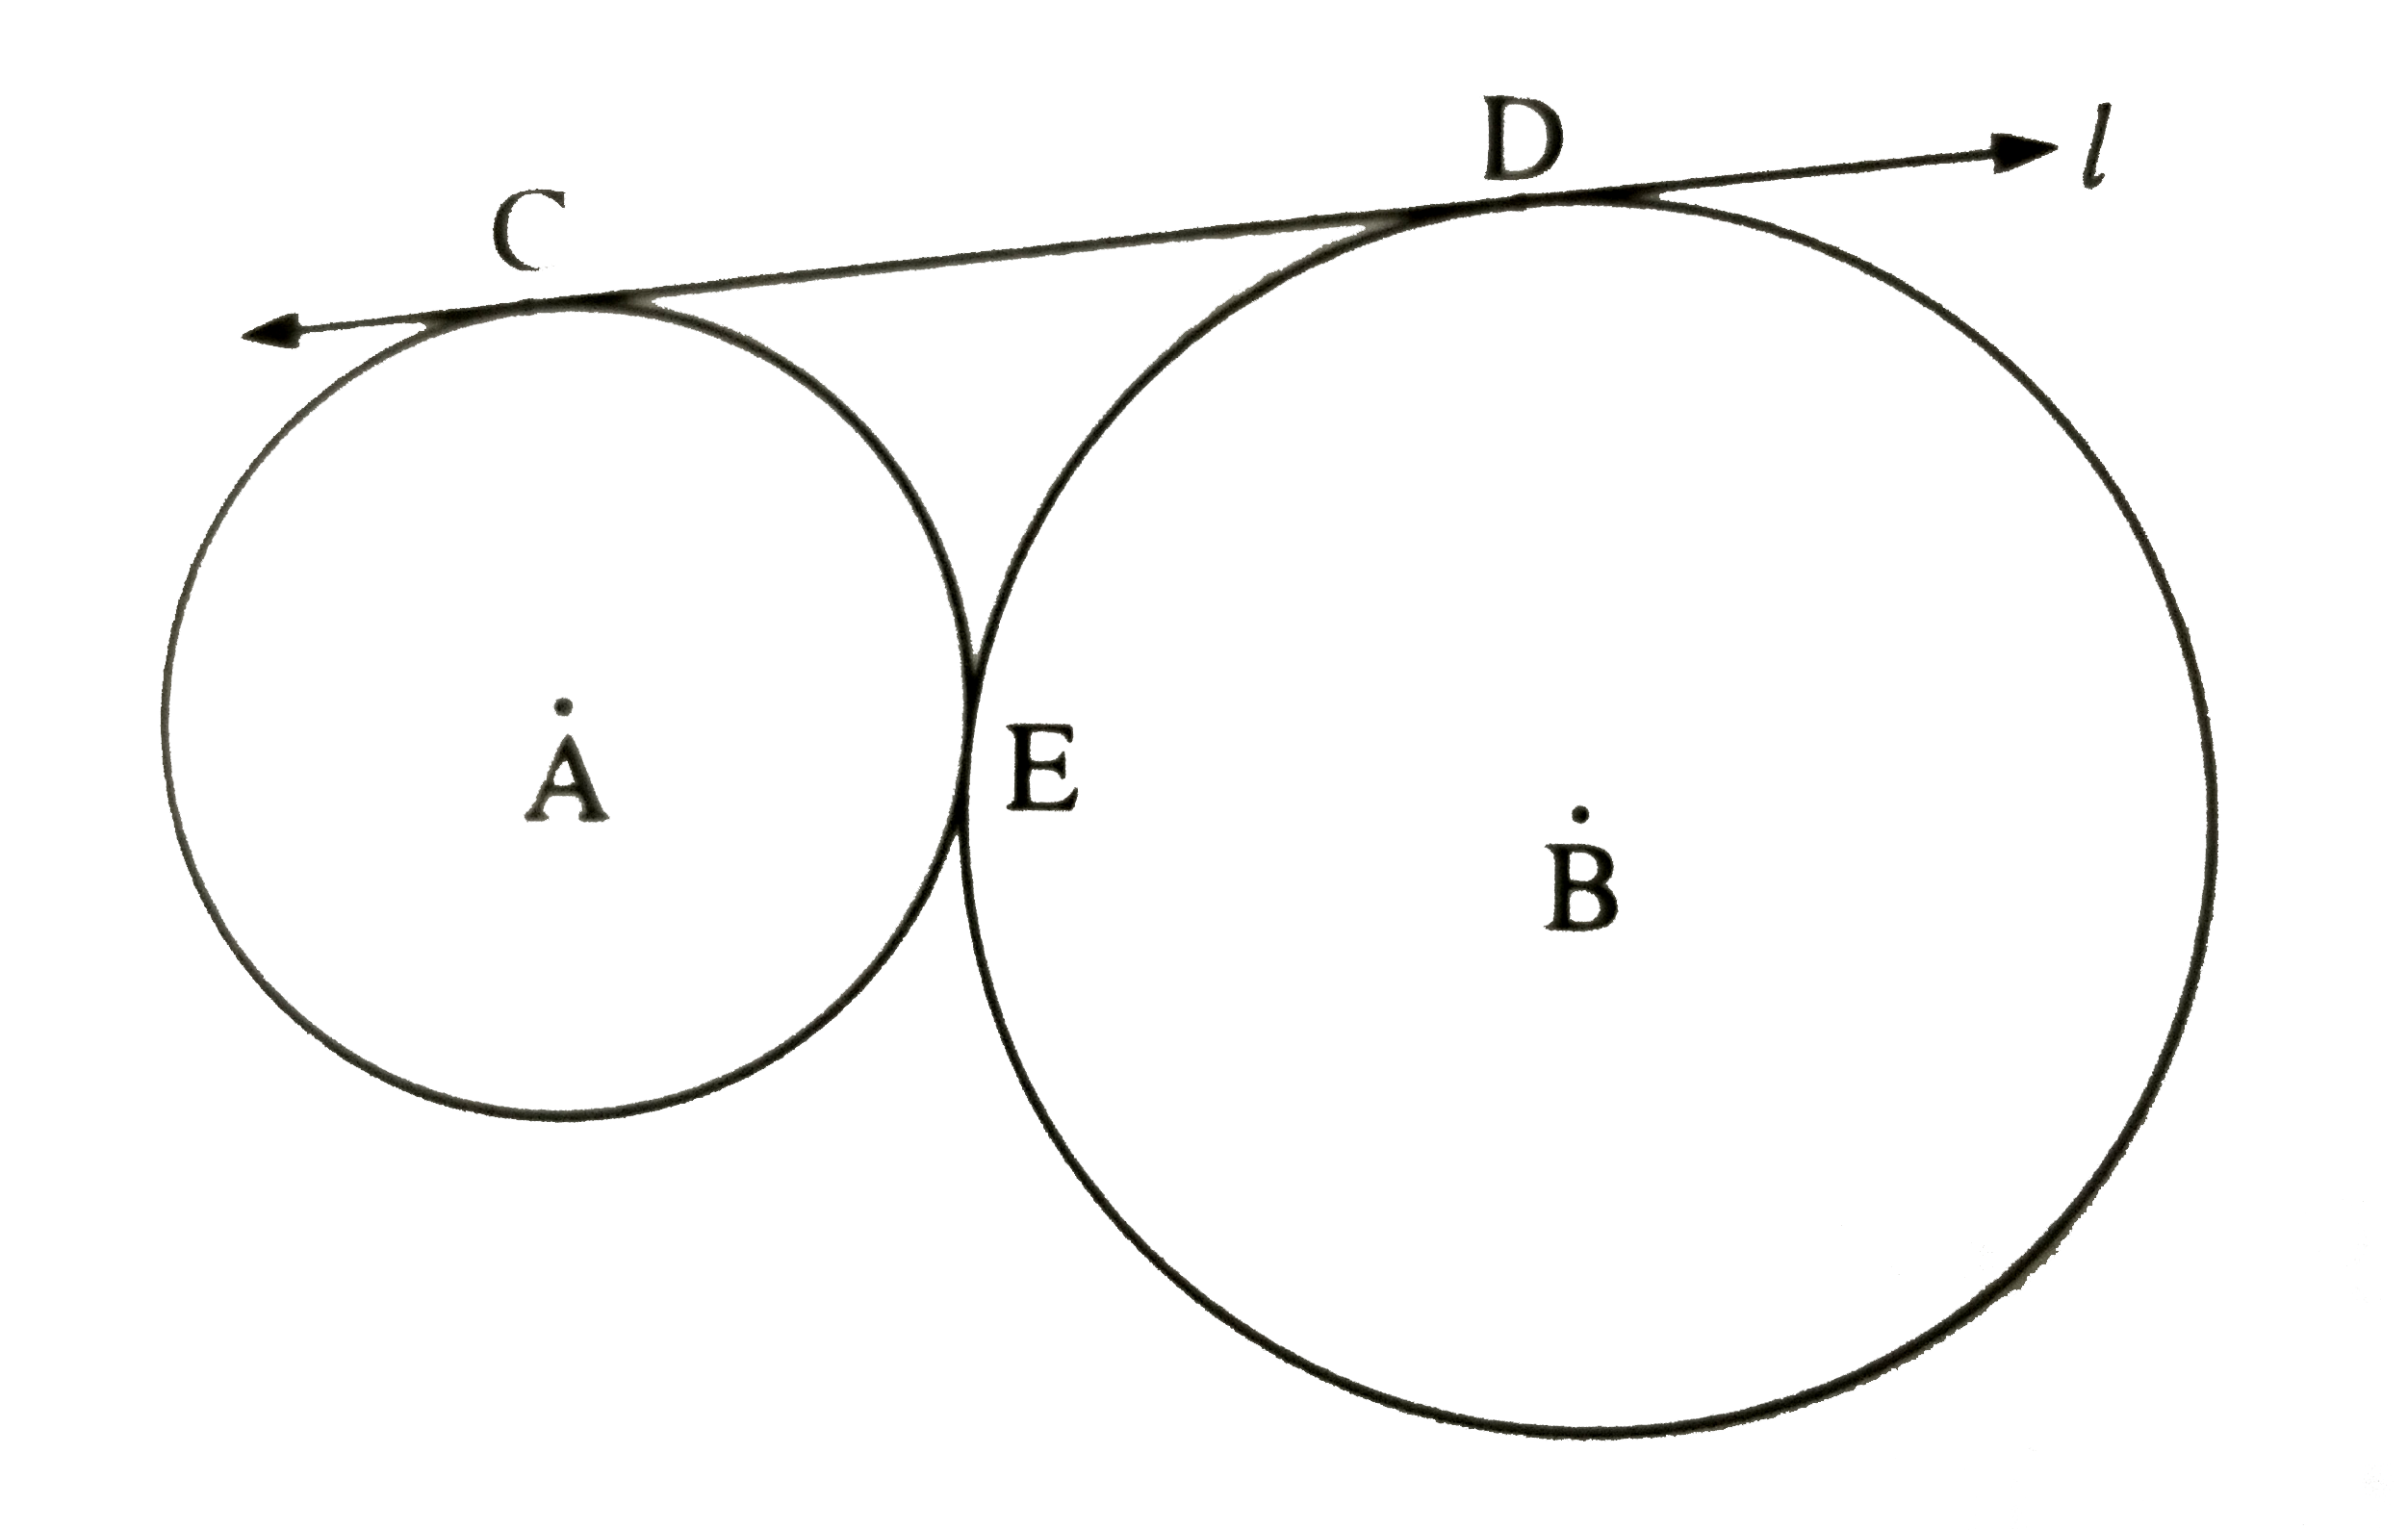 In the figure, the circles with centeres A and B touch each other at E. Line l is a common tangent which touches the circles at C and D respectively. Find the length of seg CD, if the radii of the circle are 4 cm, 6 cm.